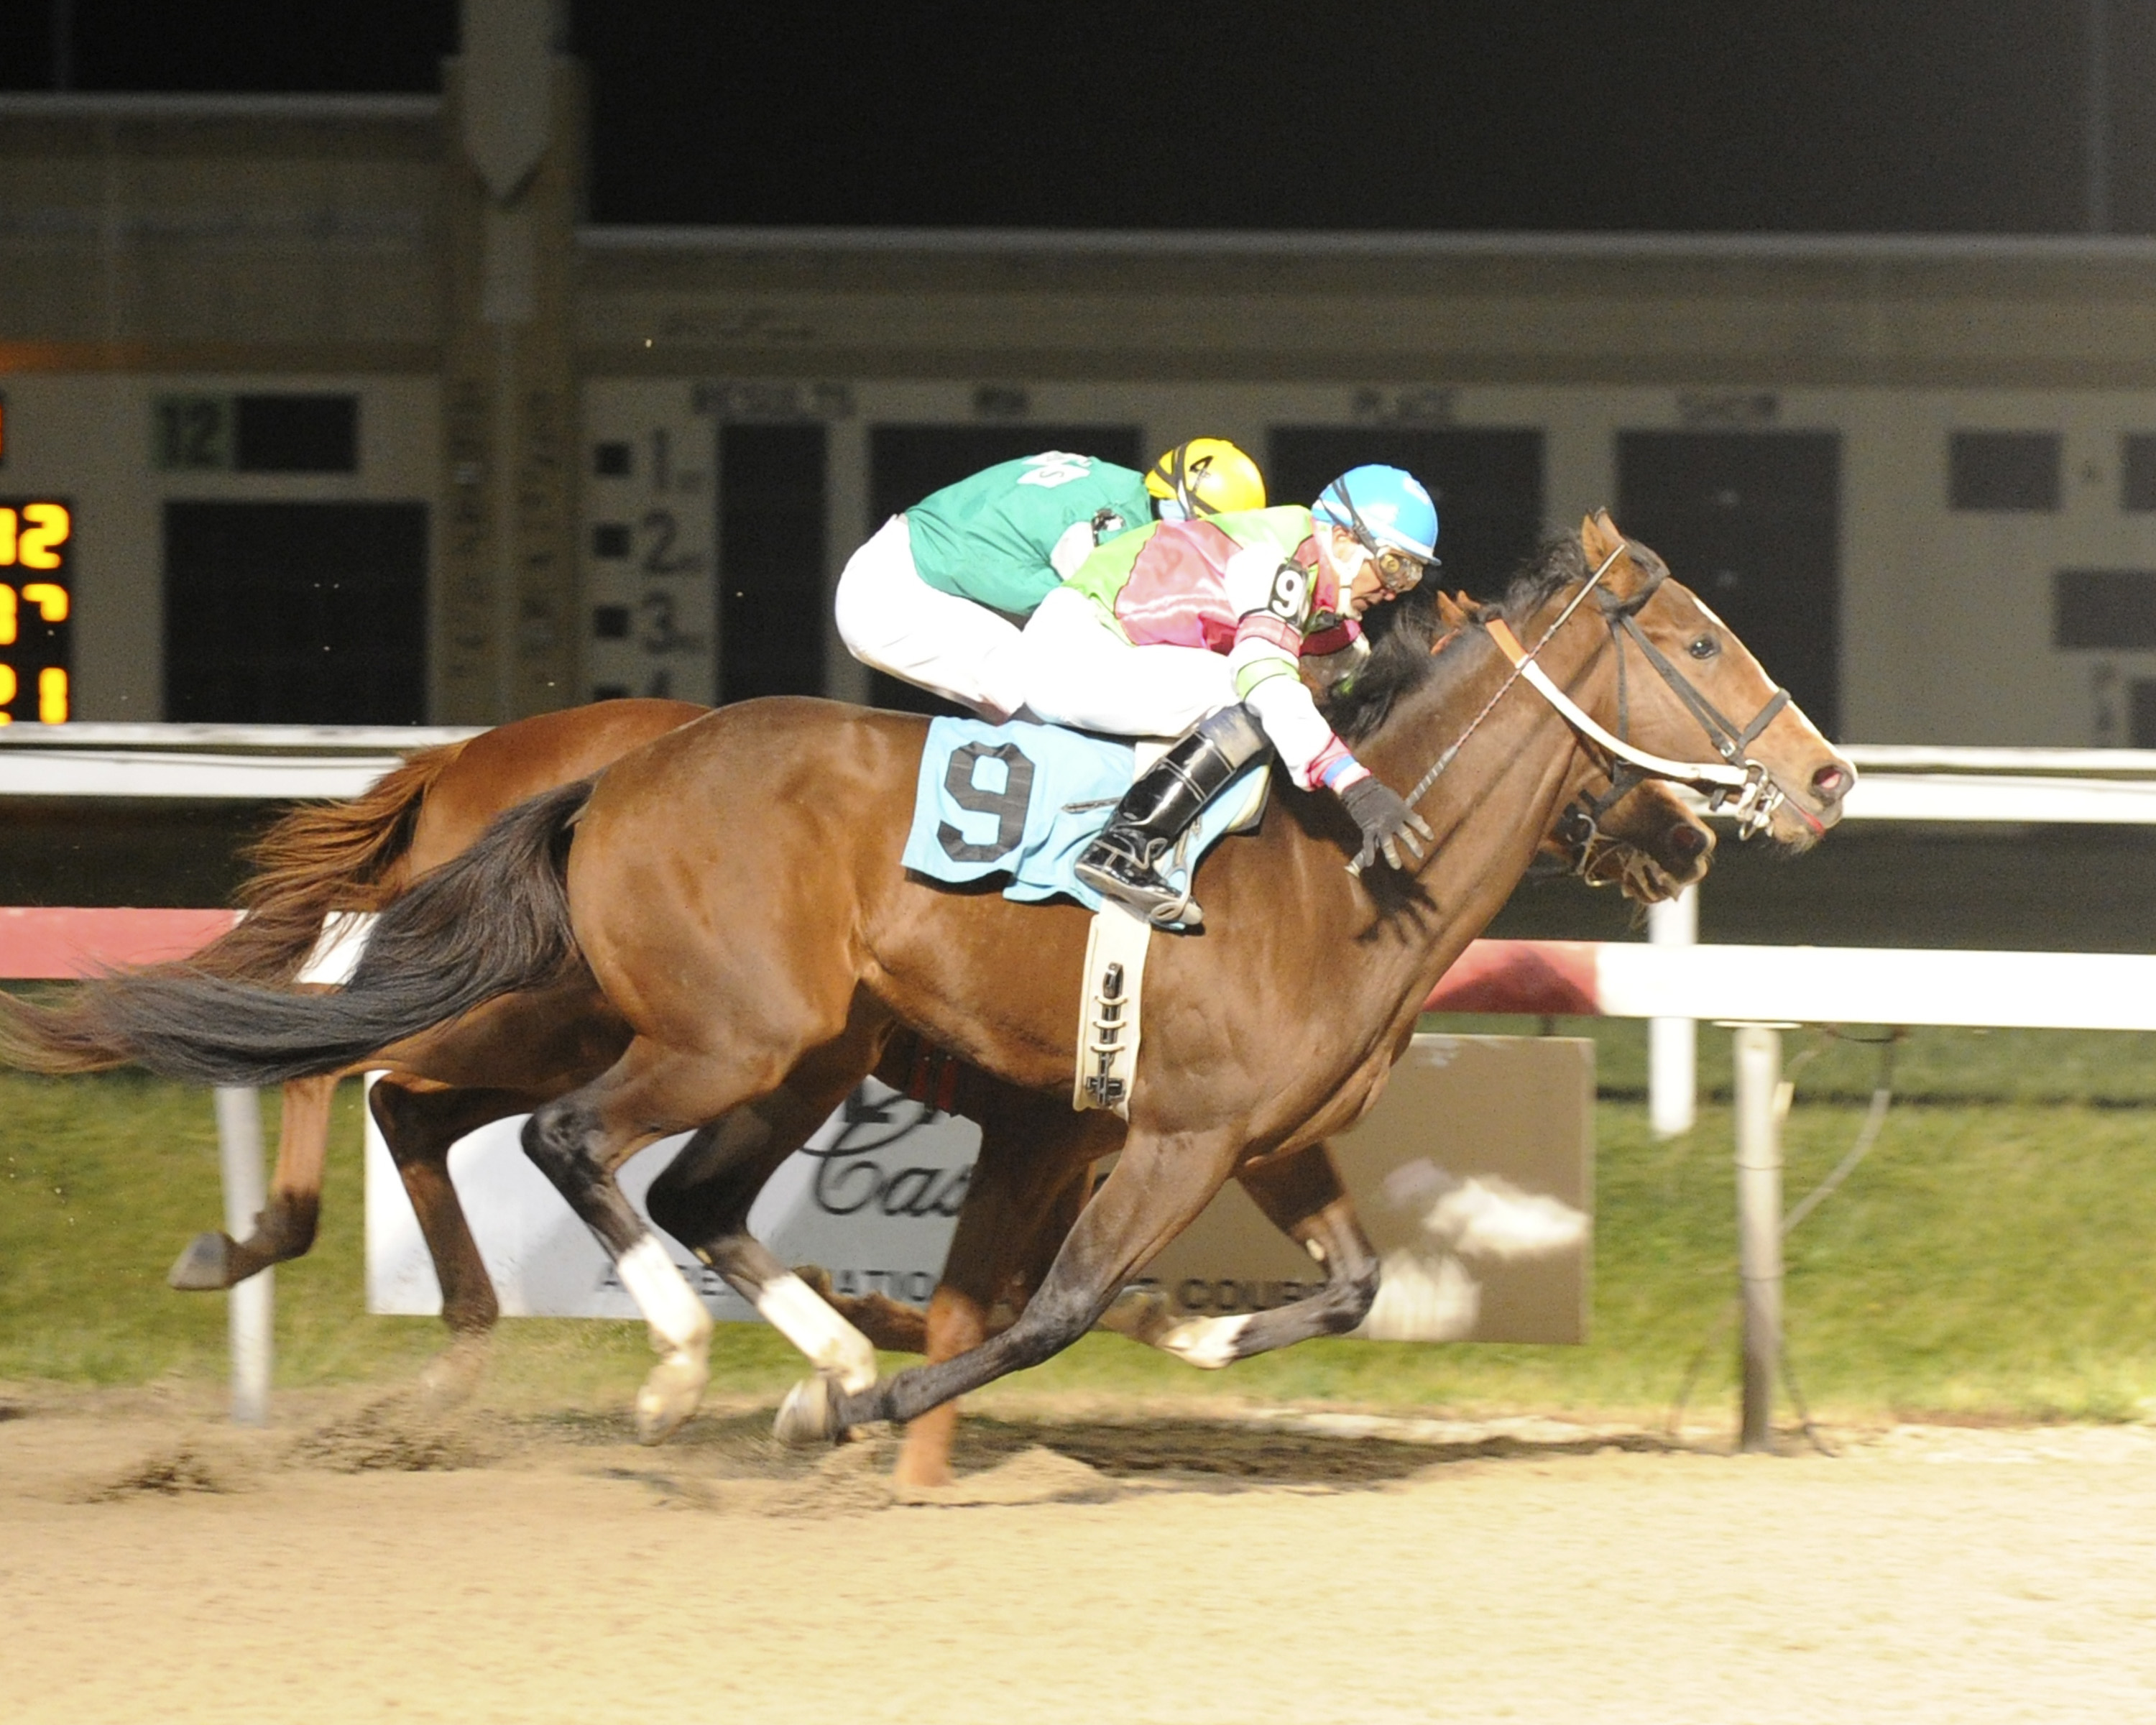 Peace of Green Rvf wins by a neck over Majestic Calling. Photo by B & D Photography.